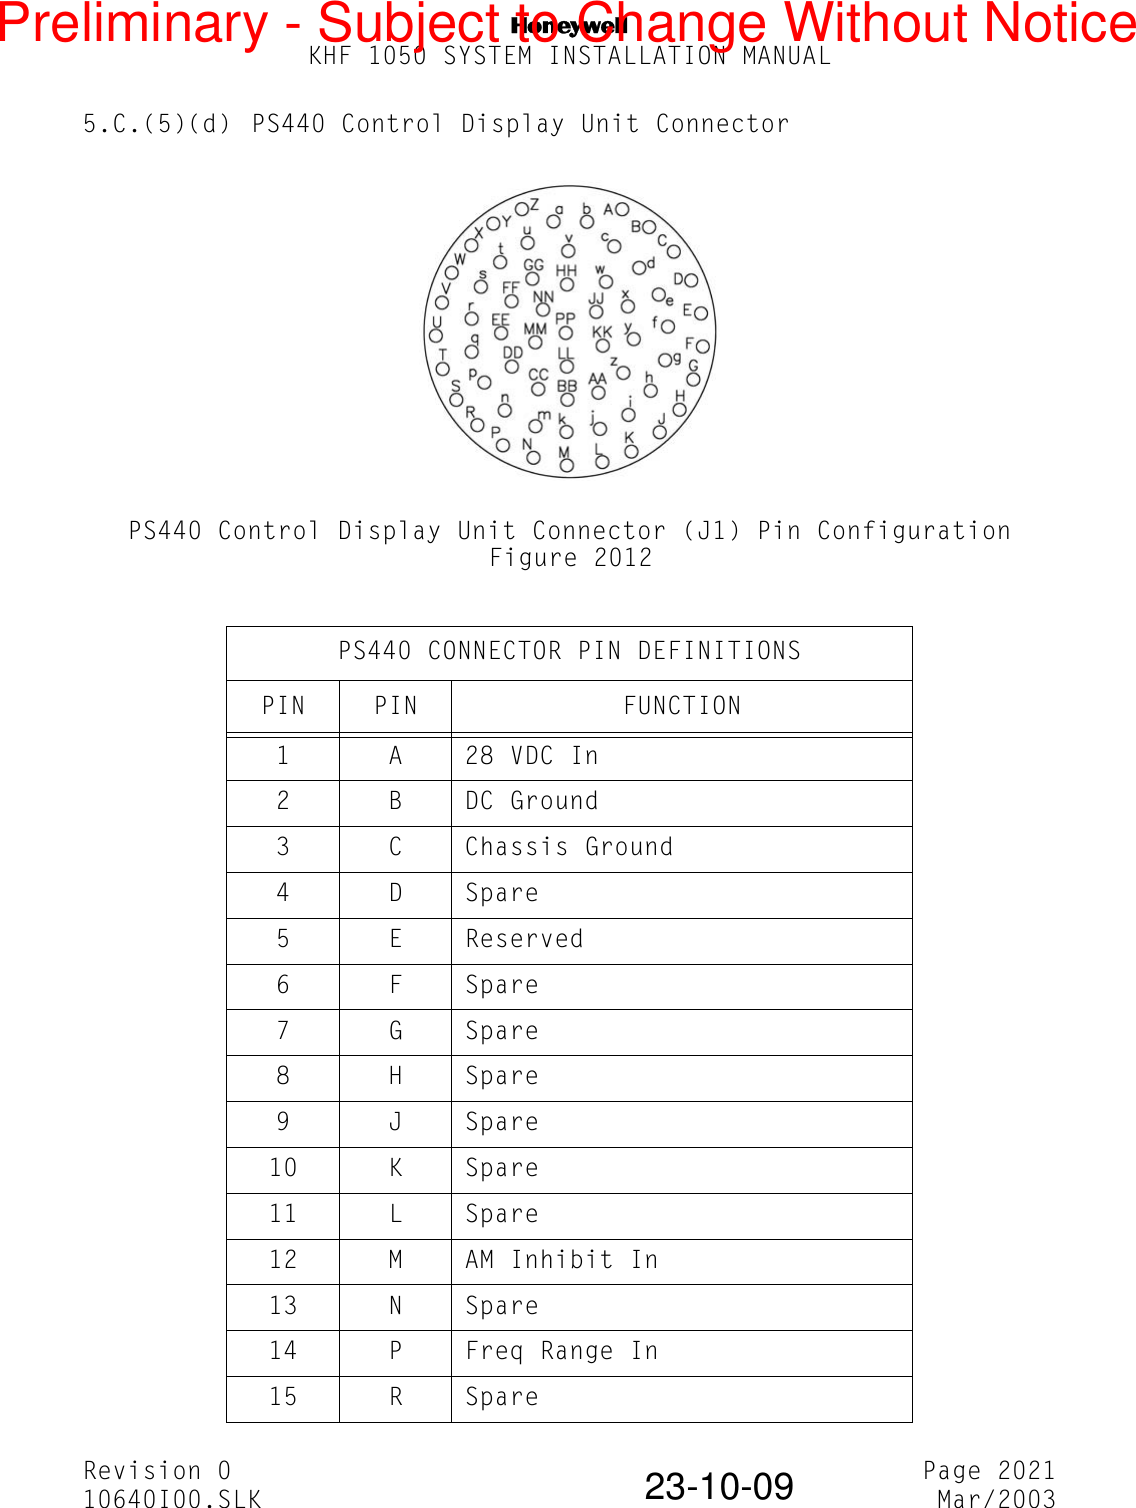 NKHF 1050 SYSTEM INSTALLATION MANUALRevision 0 Page 202110640I00.SLK Mar/200323-10-095.C.(5)(d) PS440 Control Display Unit ConnectorPS440 Control Display Unit Connector (J1) Pin ConfigurationFigure 2012PS440 CONNECTOR PIN DEFINITIONSPIN PIN FUNCTION1 A 28 VDC In2 B DC Ground3 C Chassis Ground4 D Spare5 E Reserved6 F Spare7 G Spare8 H Spare9 J Spare10 K Spare11 L Spare12 M AM Inhibit In13 N Spare14 P Freq Range In15 R SparePreliminary - Subject to Change Without Notice